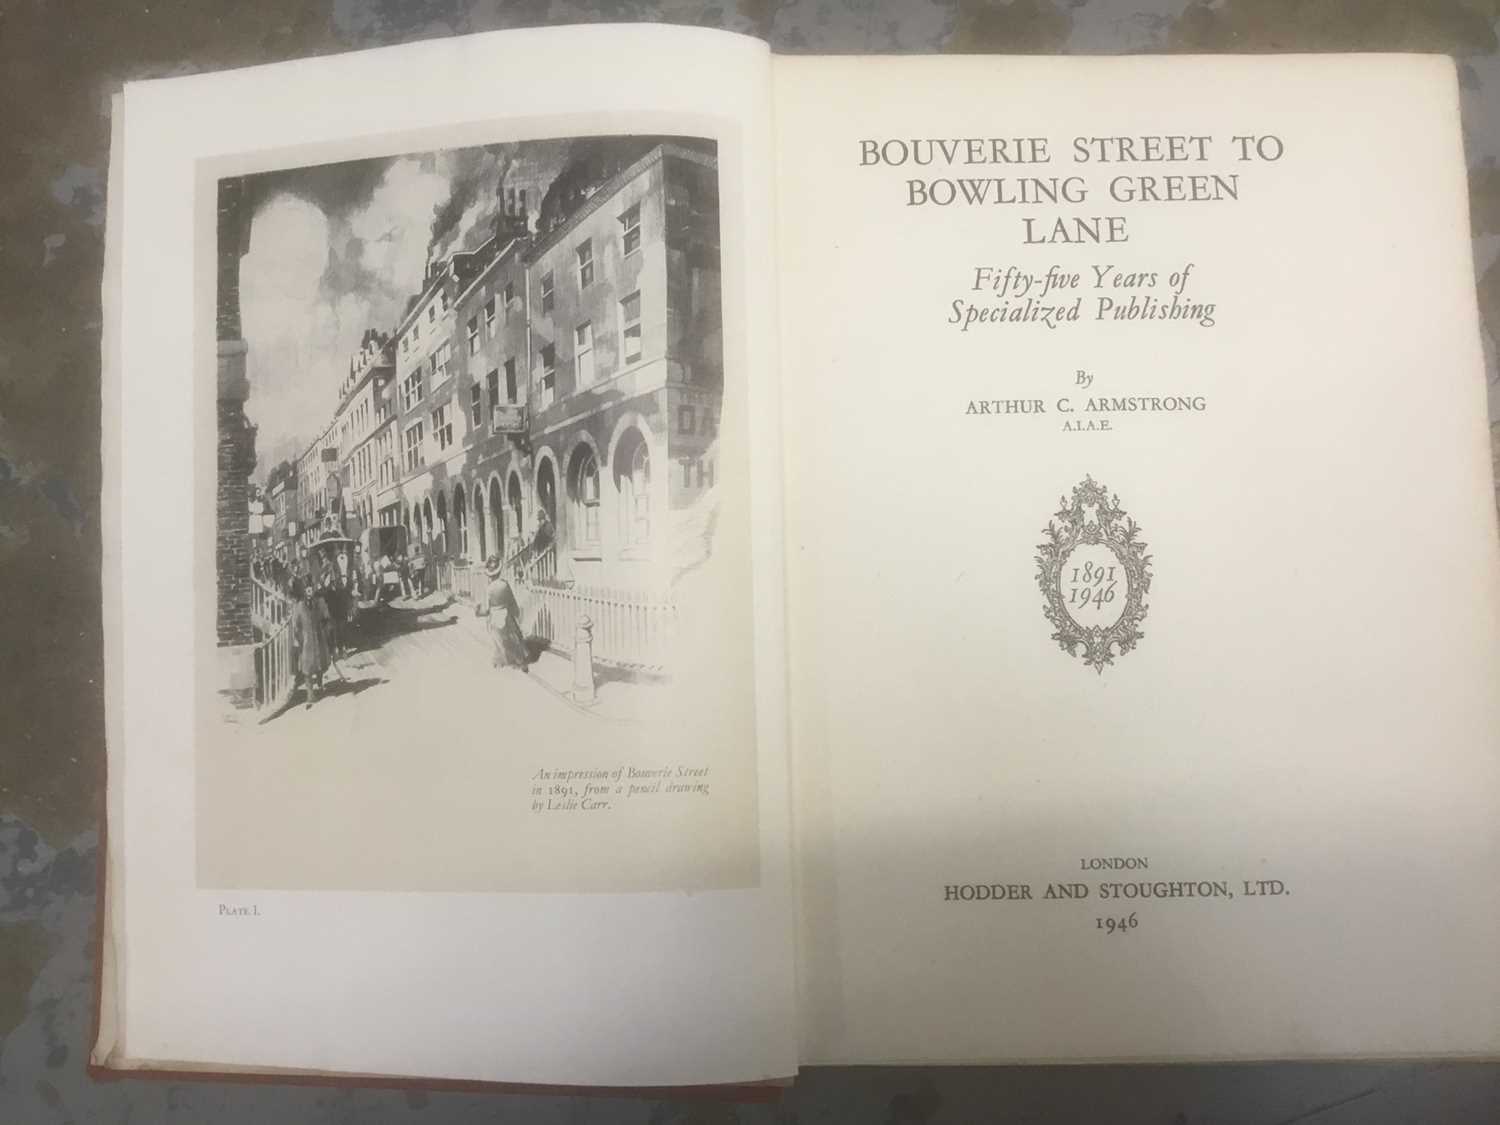 Bouverie Street to Bowling Green Lane 55 years of specialist Publishing by Arthur Armstrong, Hodder - Image 3 of 3